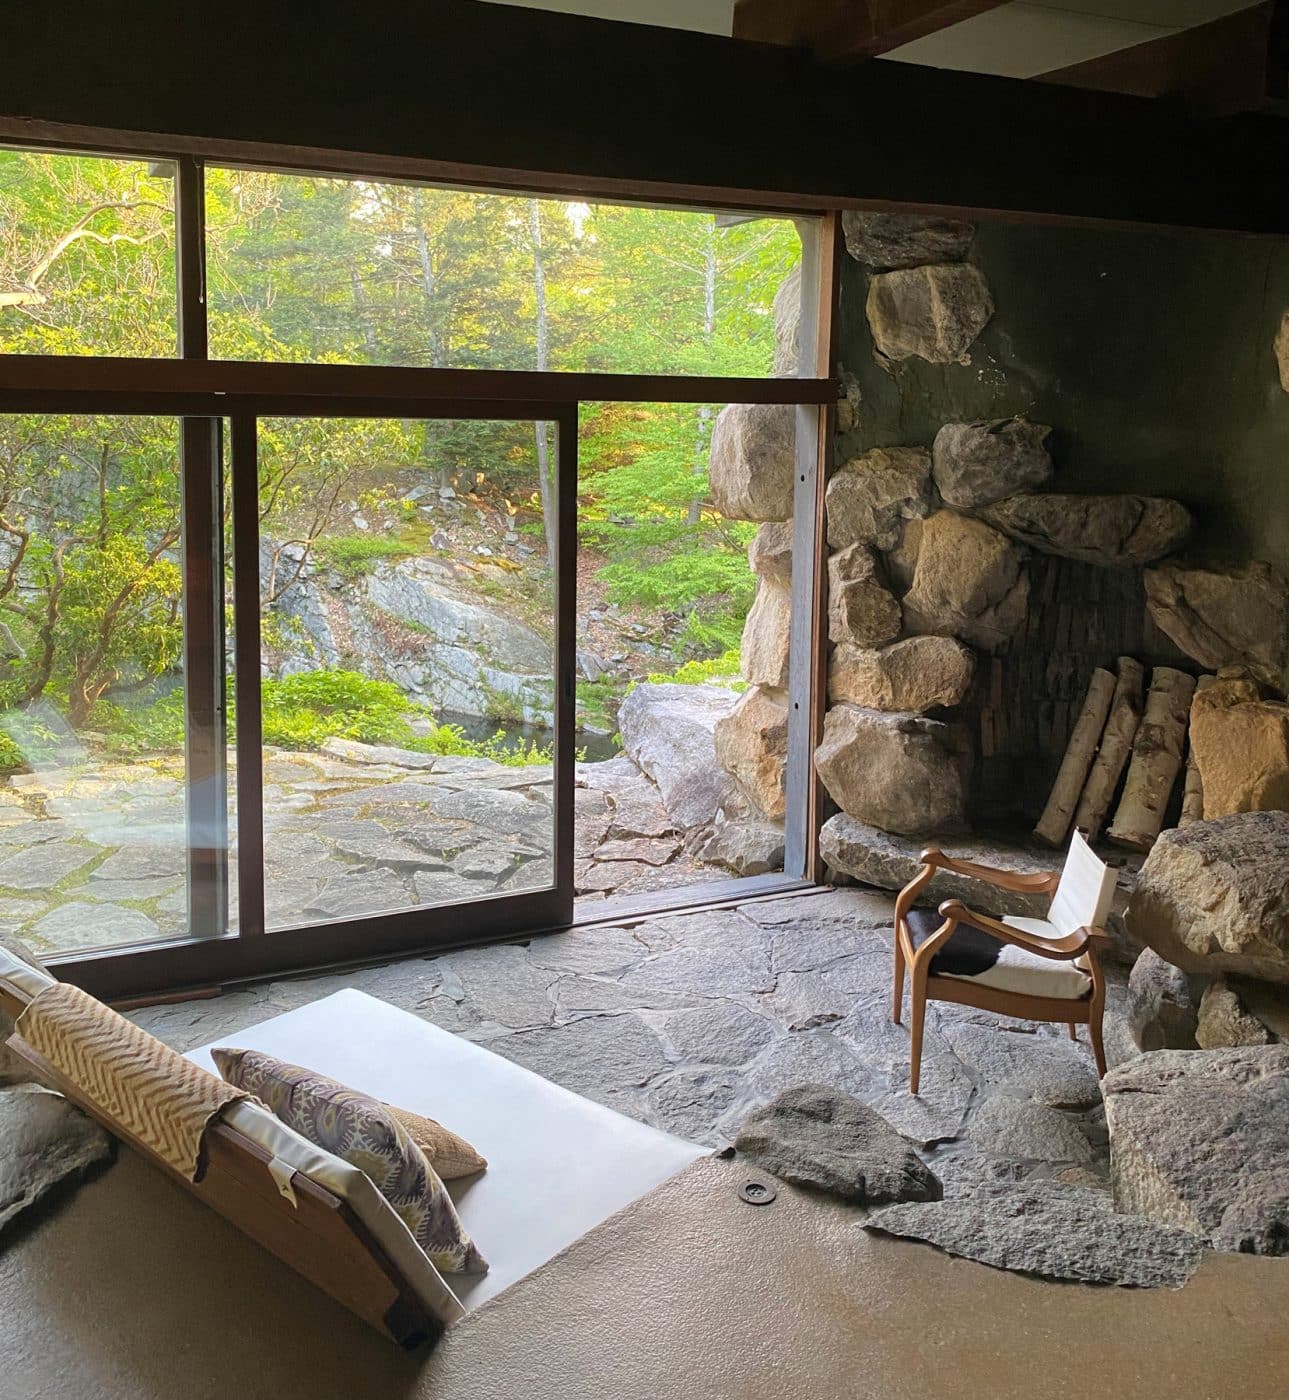 The living room of Russel Wright's home at Manitoga